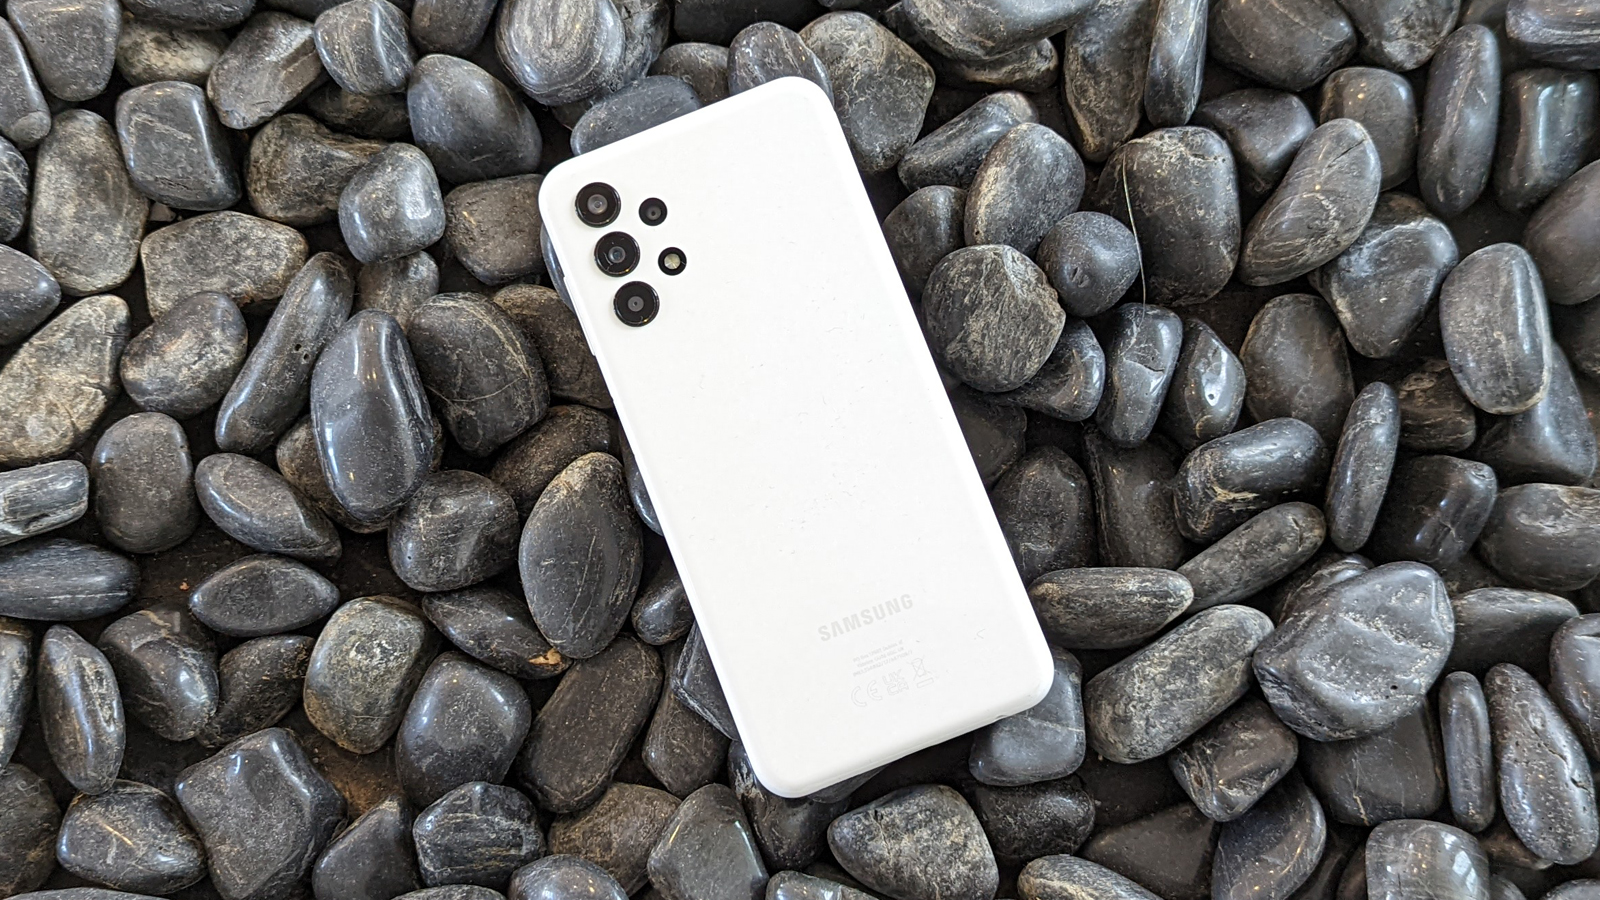 The back of the Samsung Galaxy A13 on a surface of pebbles